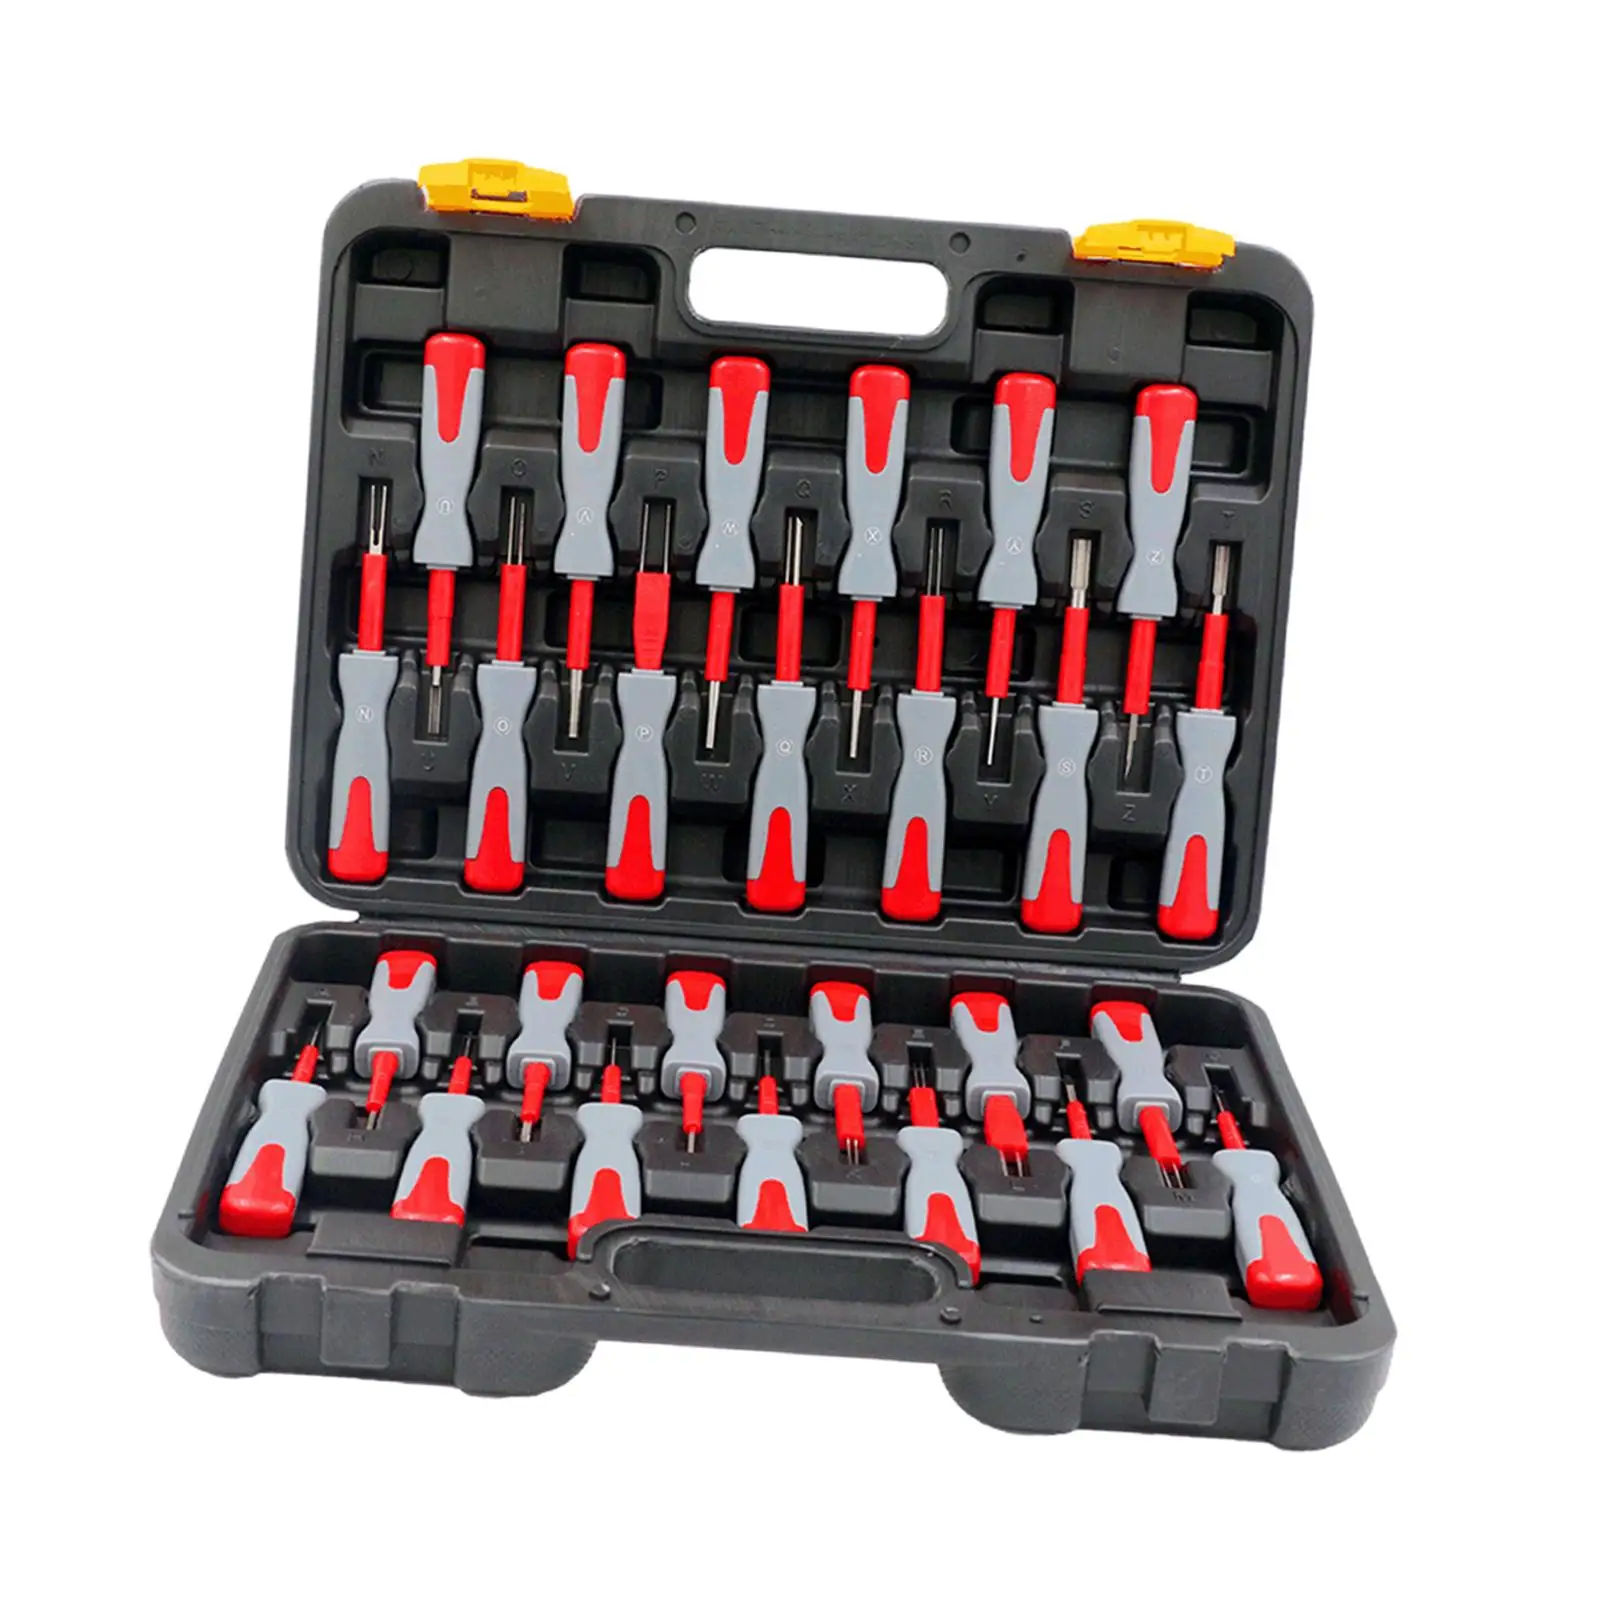 26Pcs Car Terminal Removal Tool Kit Other Household Devices for Car Connector Terminal Car Repair Extractor Plastic Handle